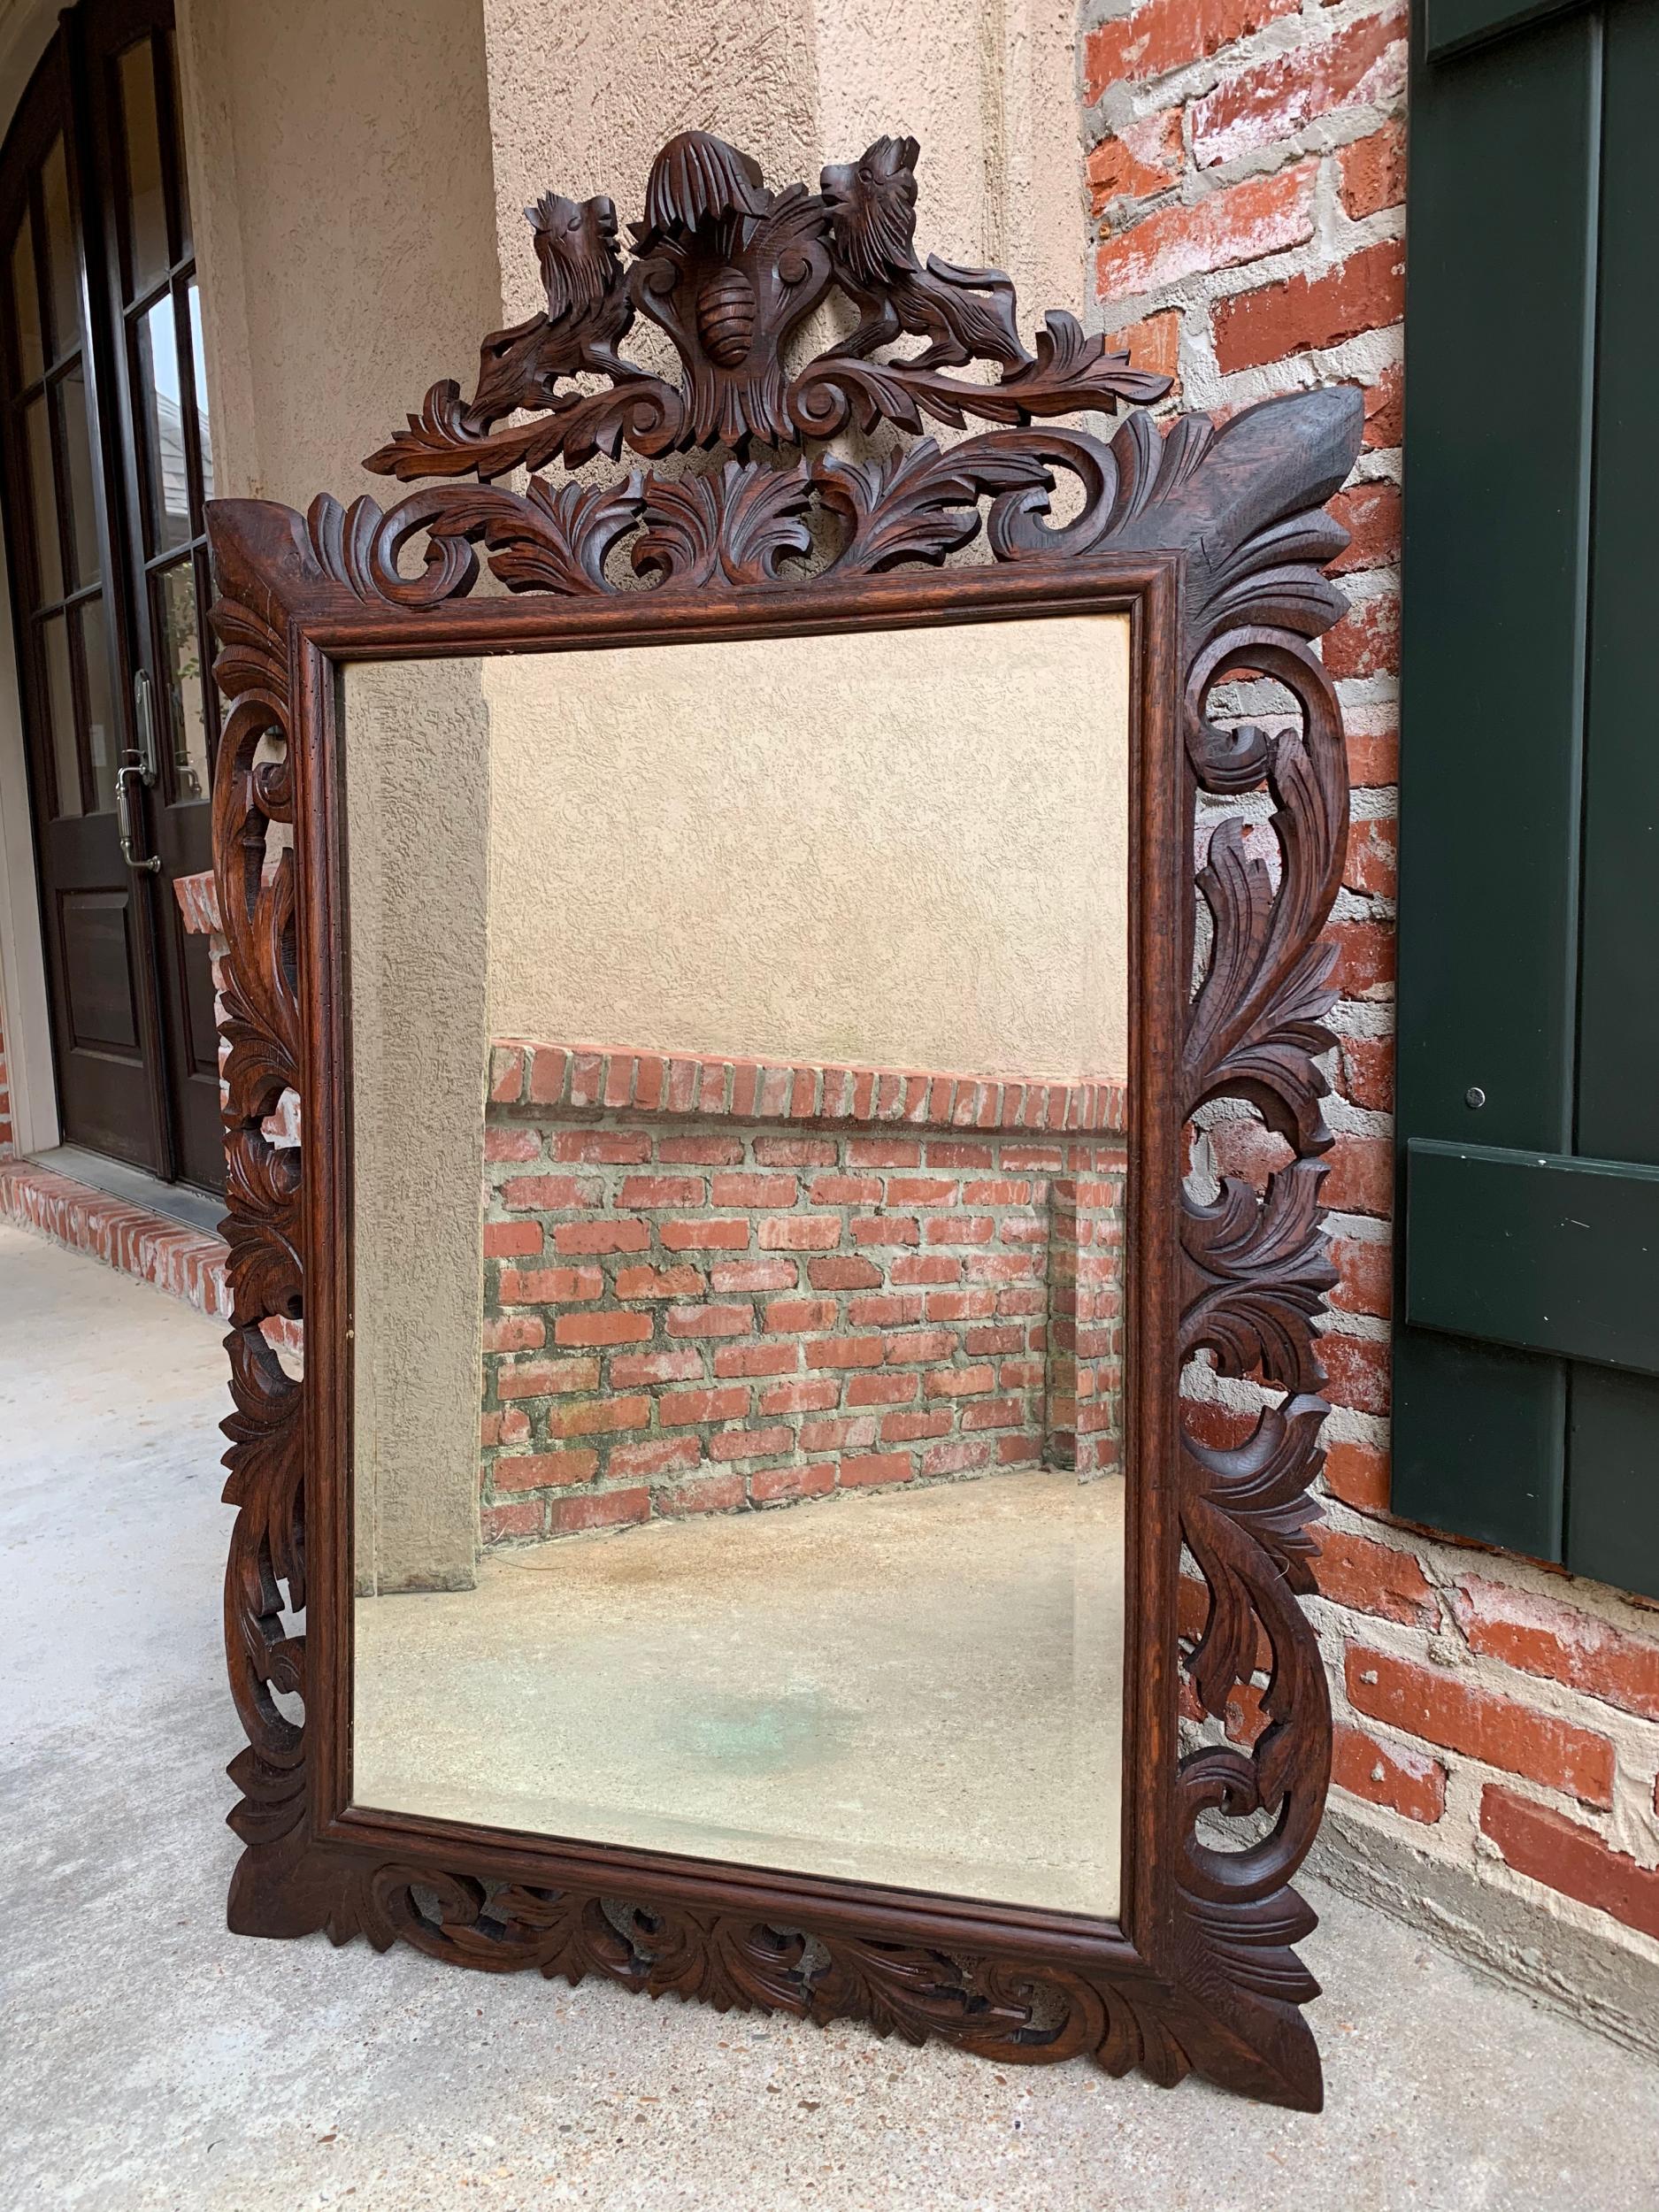 Antique French carved oak frame beveled mirror wall mantel Louis XIV Renaissance.

~Direct from France~
~Large and lovely antique carved French wall or mantel mirror~
~Wide frame, open carved on all sides, classic style that blends with any